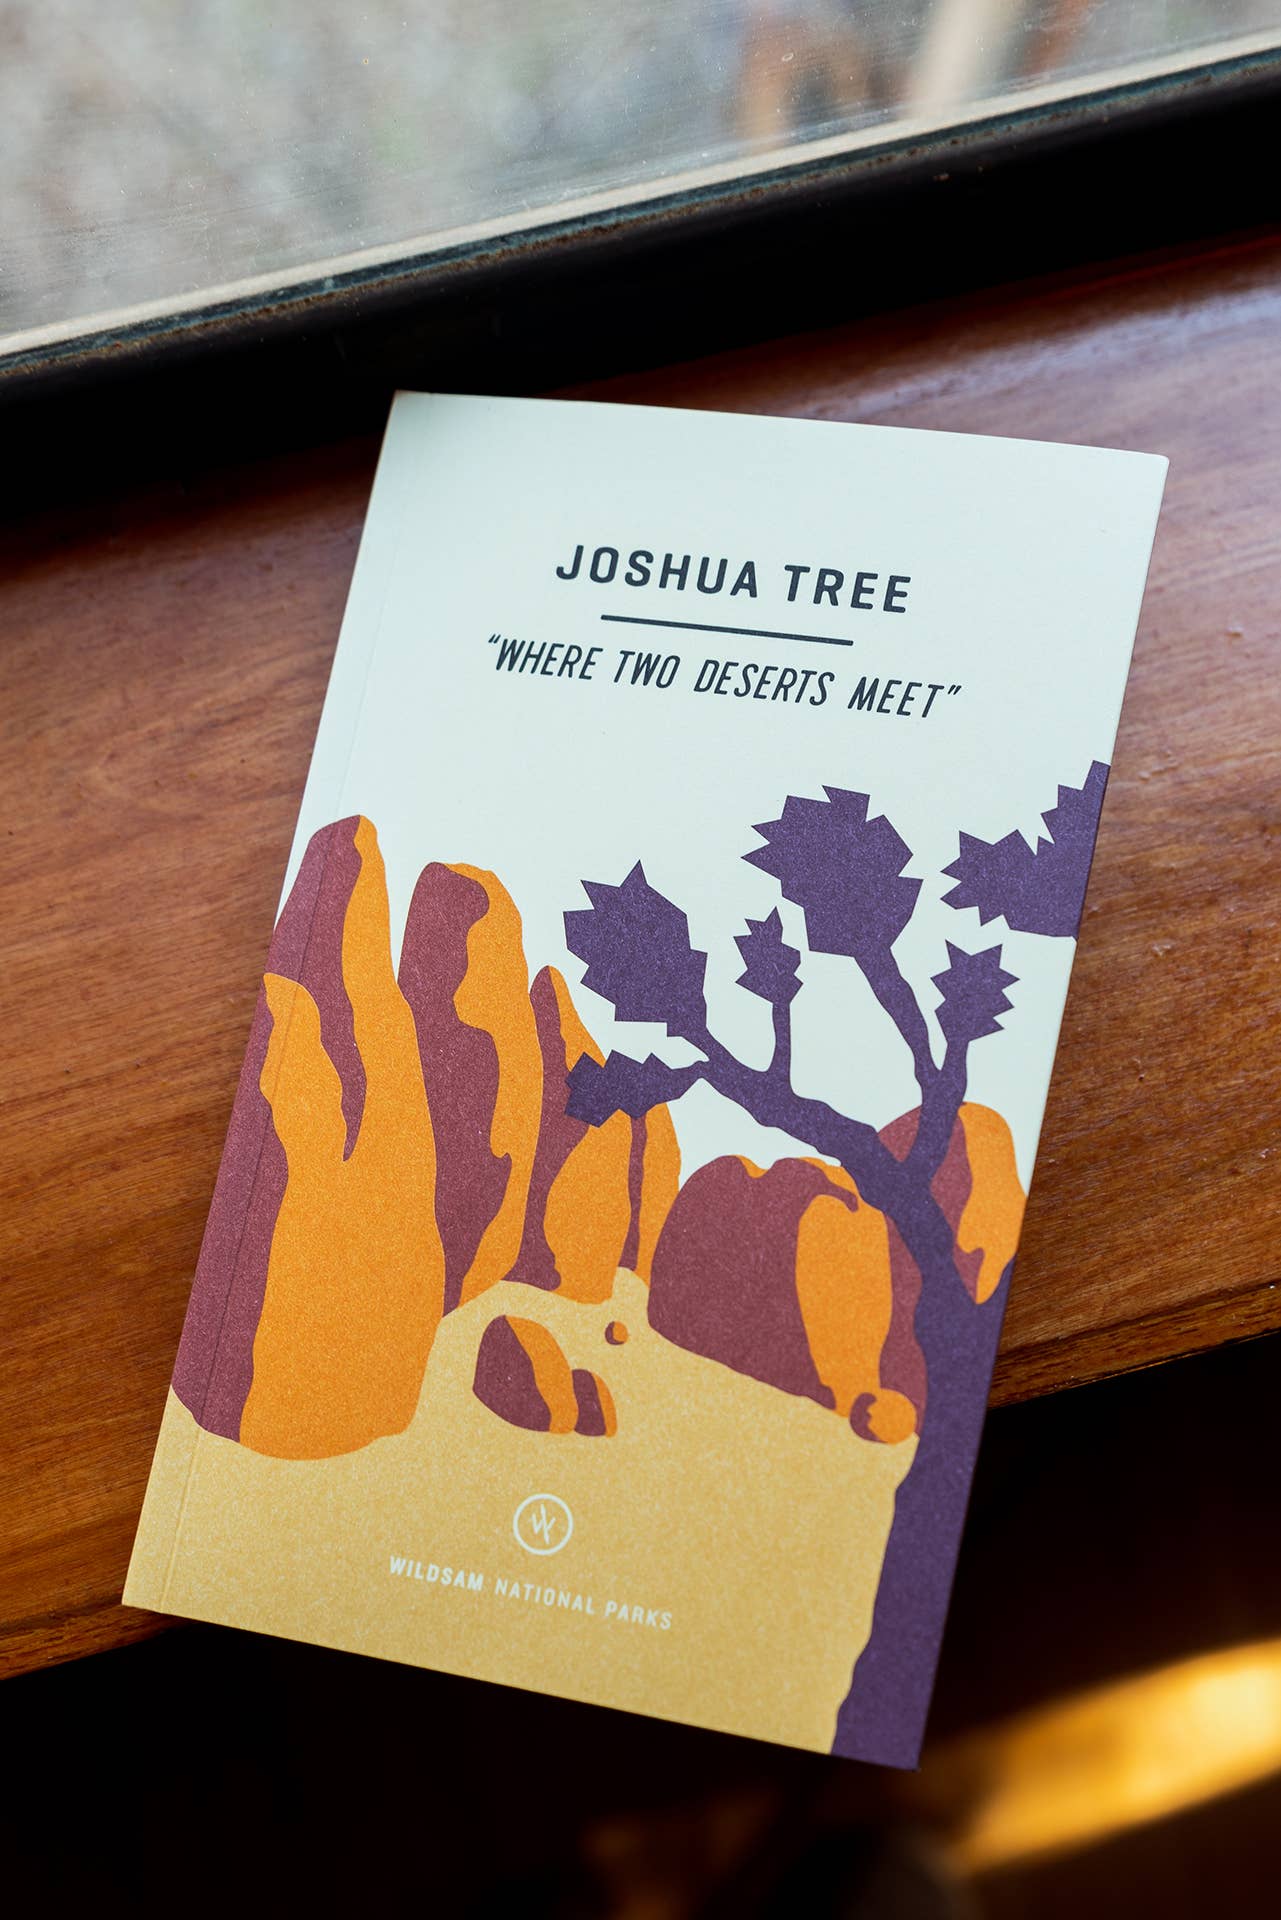 Wildsam Field Guides - Joshua Tree leads travelers into one of America’s most iconic and alluring desert destinations. Includes base camp recommendations, great hikes and practical tips for the high desert, wildlife corridors, ufo sightings, the local artist community and much more.